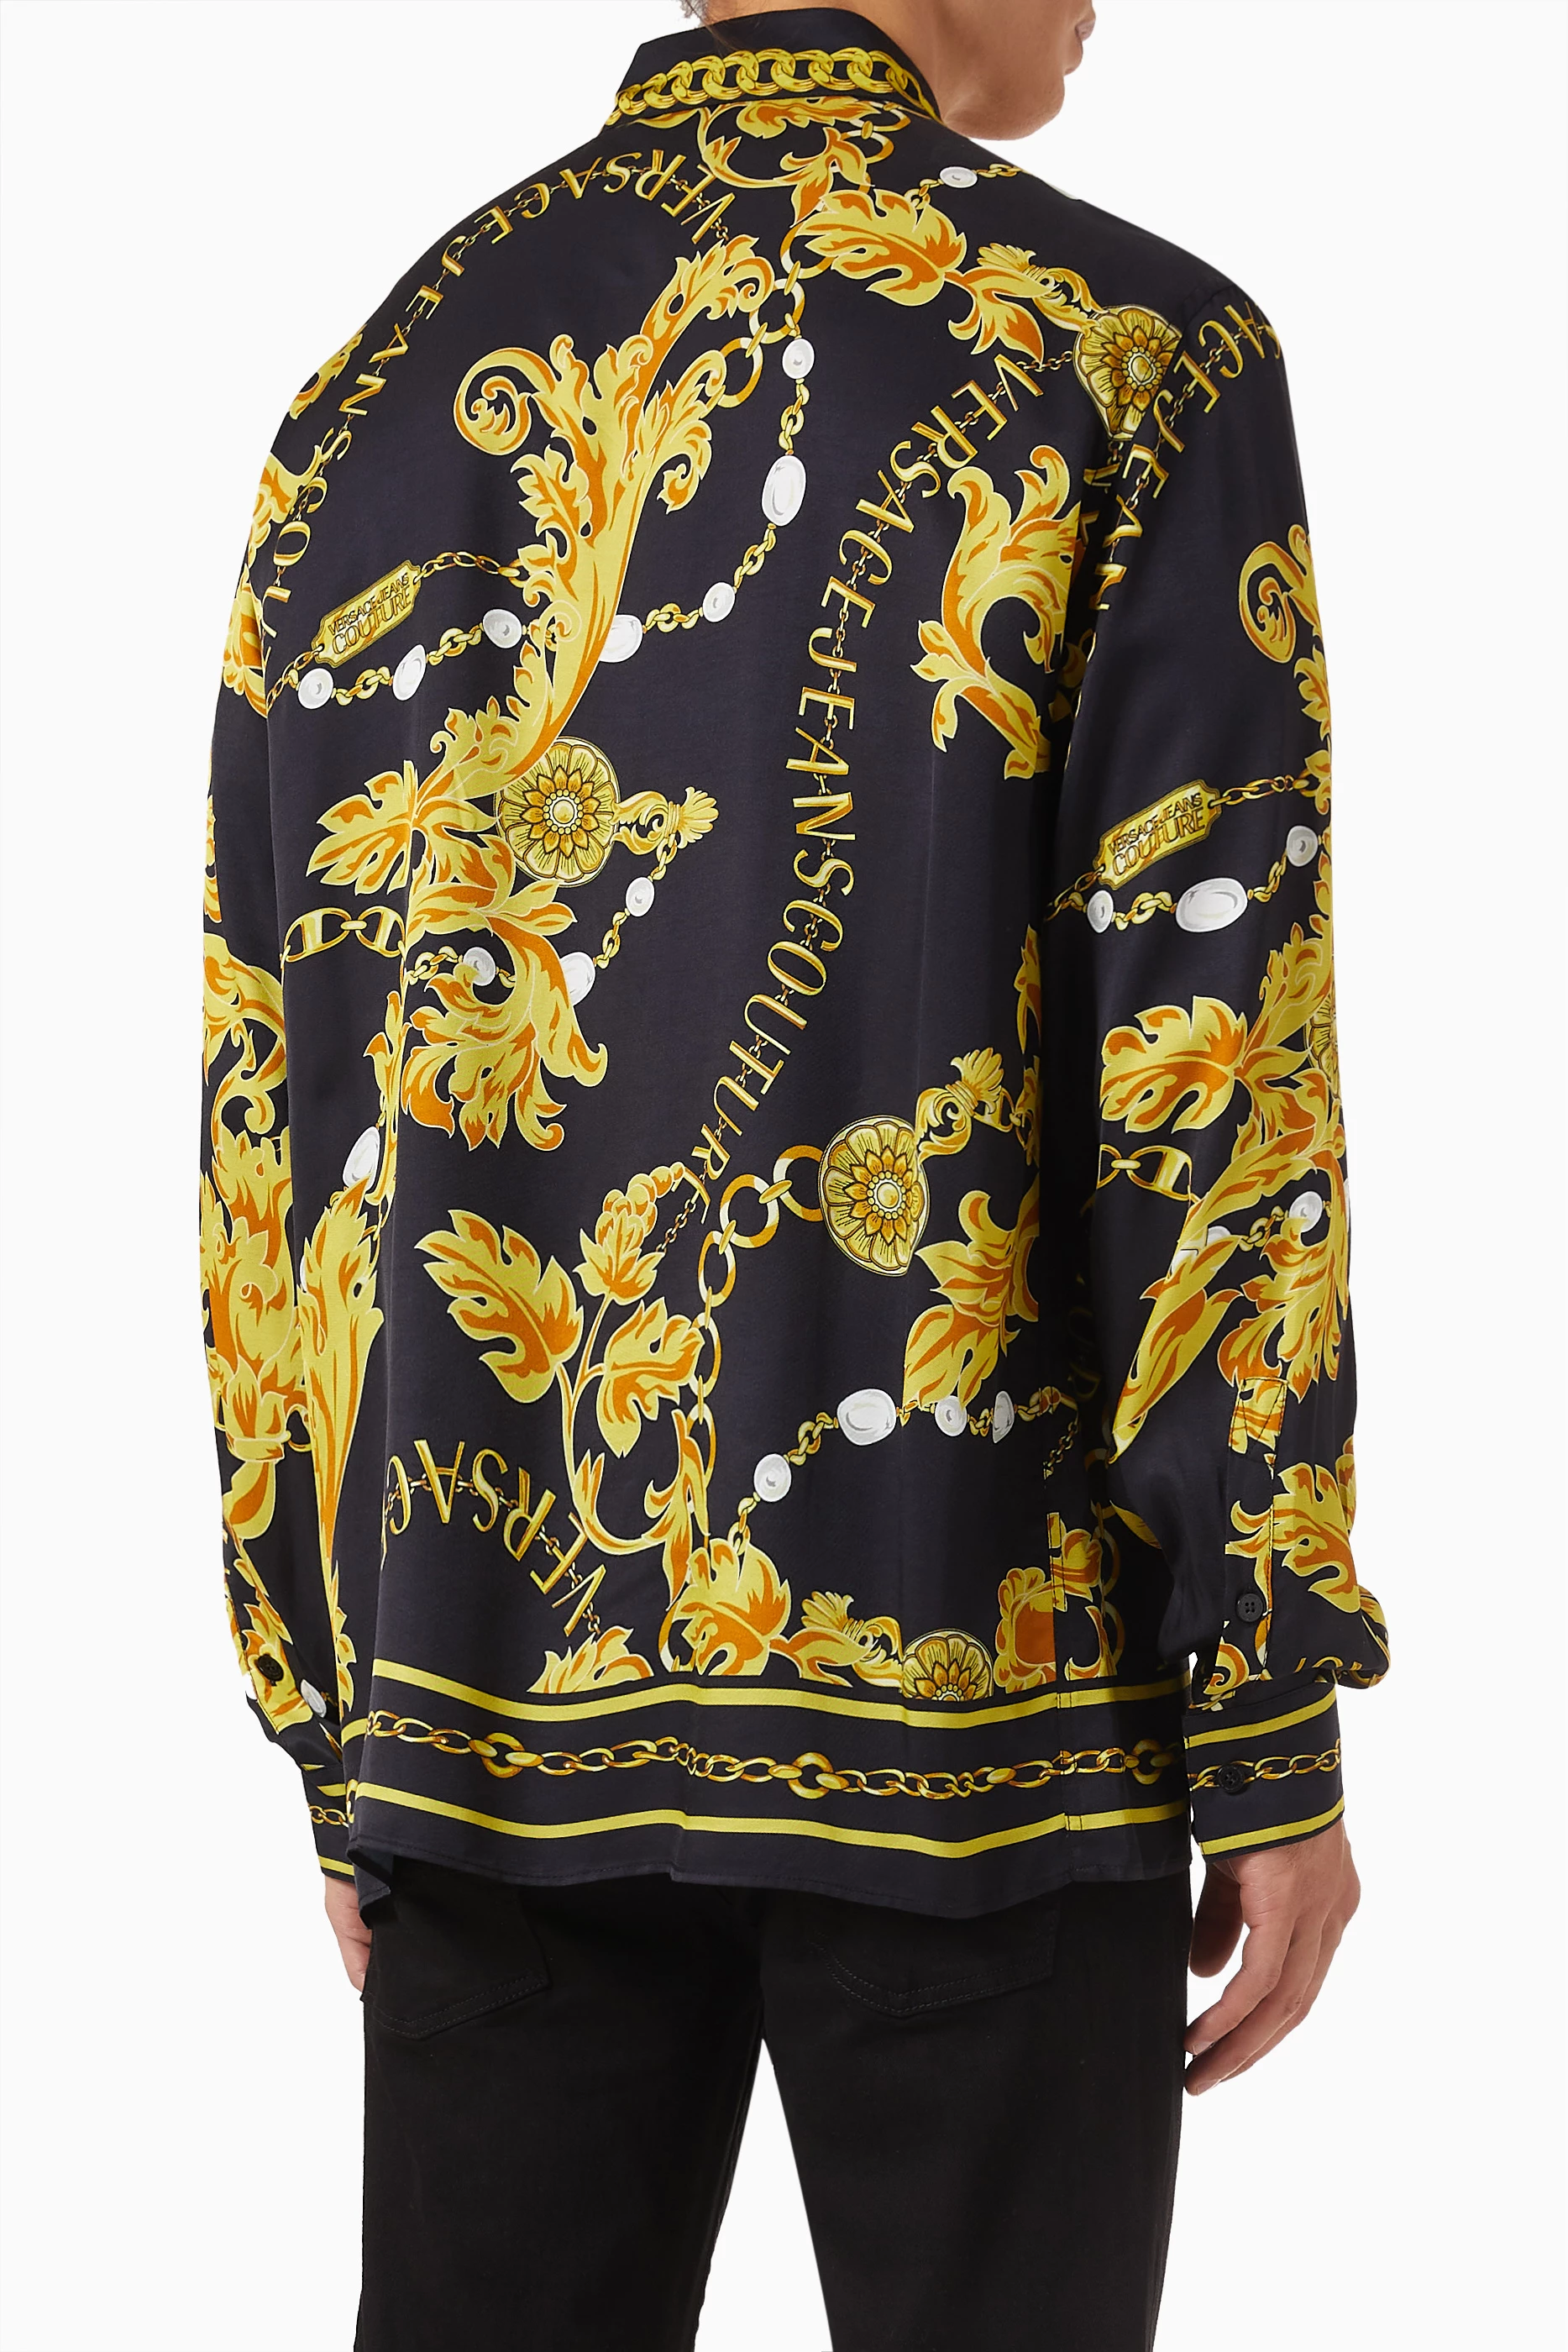 Versace Jeans Couture Chain Print All-Over Black Shirt – Retro